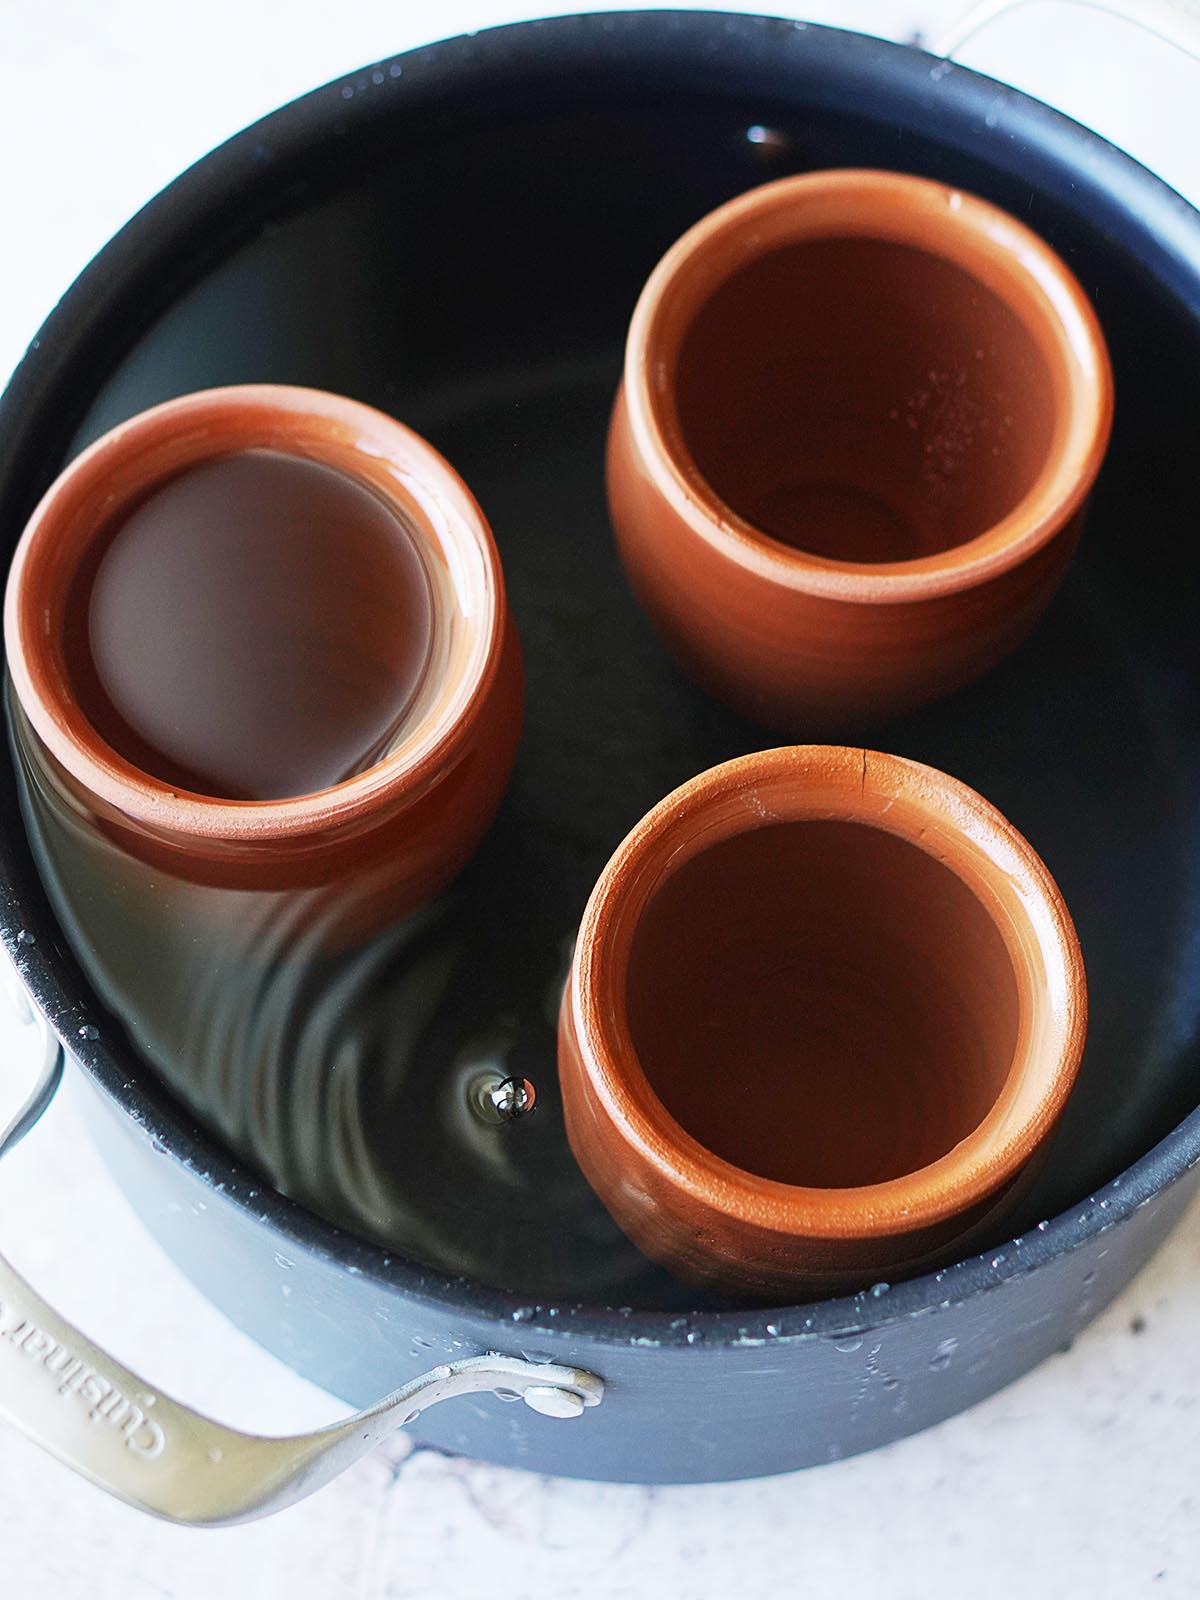 A large pot with the clay cups placed in there filled with water.